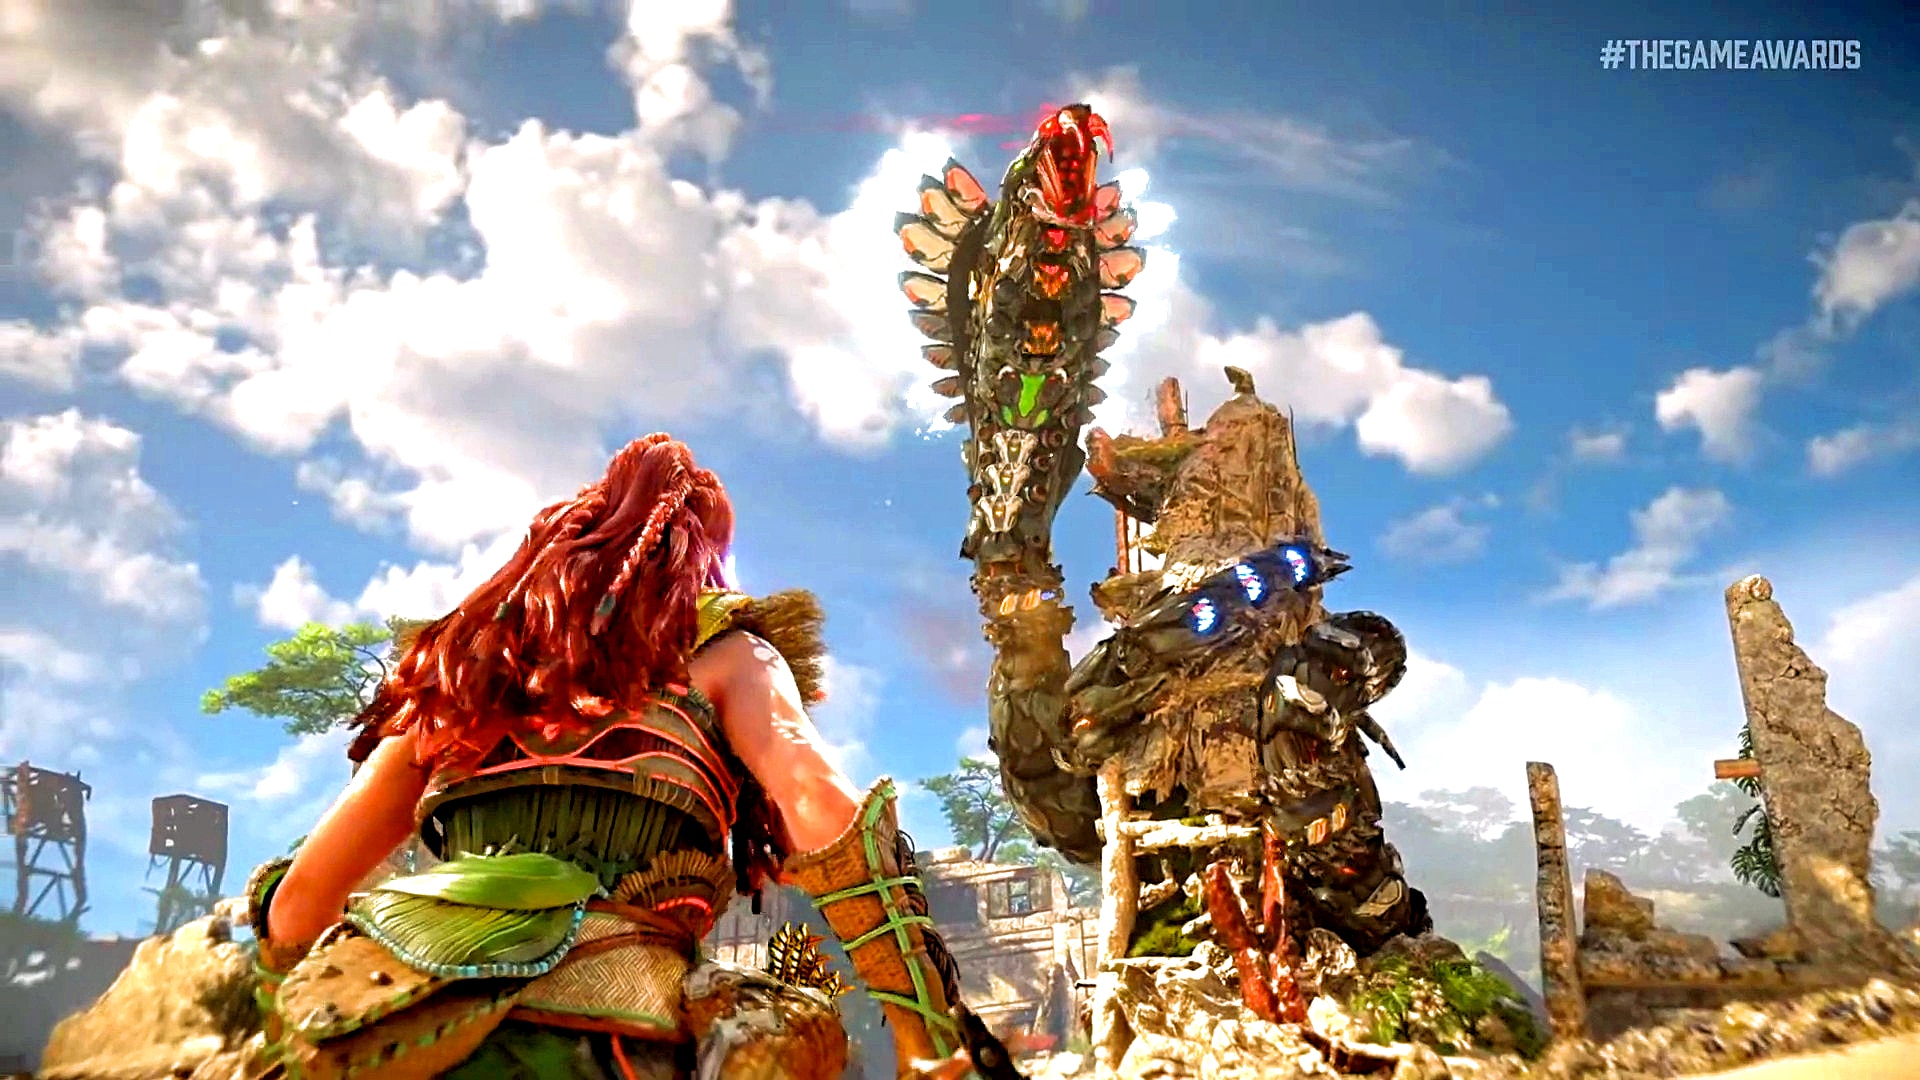 Horizon scores with a picture-perfect world and huge mecha-monsters to defeat. But the story around heroine Aloy is at least as entertaining.